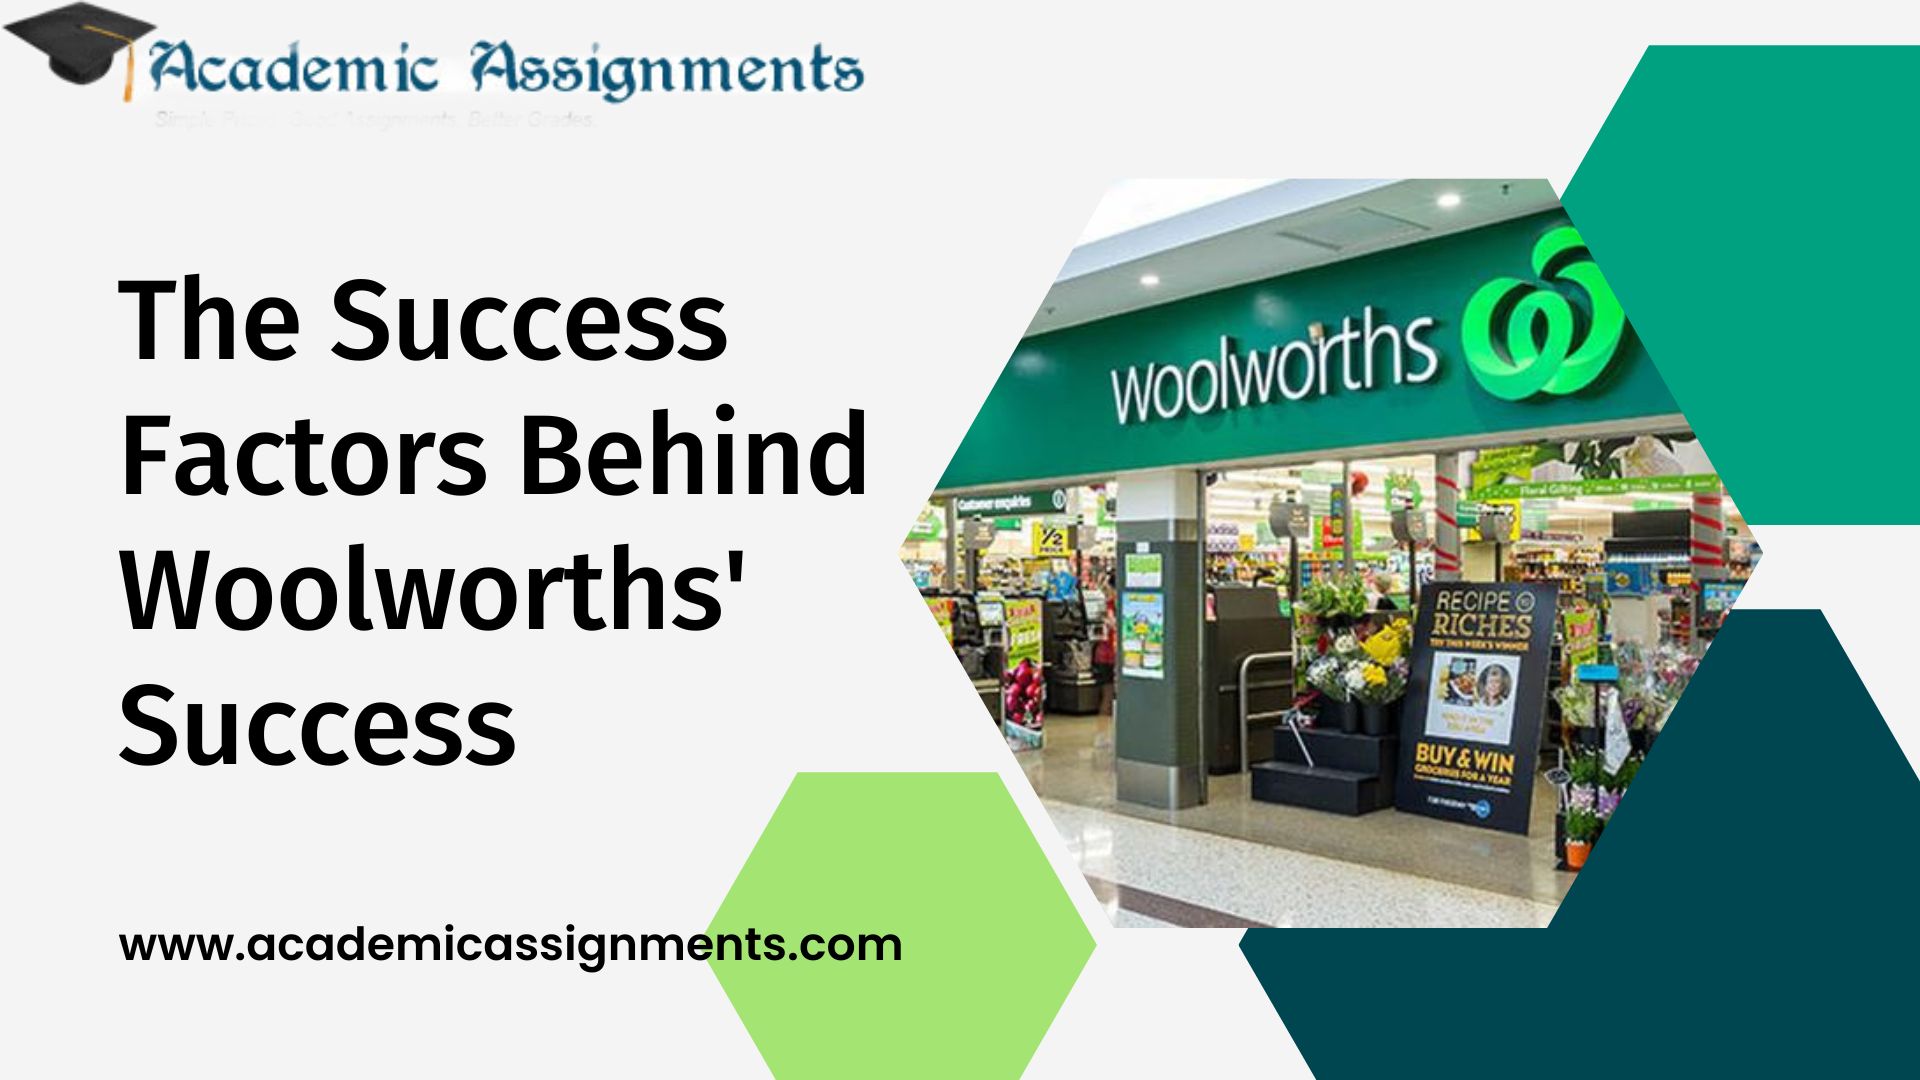 The Success Factors Behind Woolworths' Success